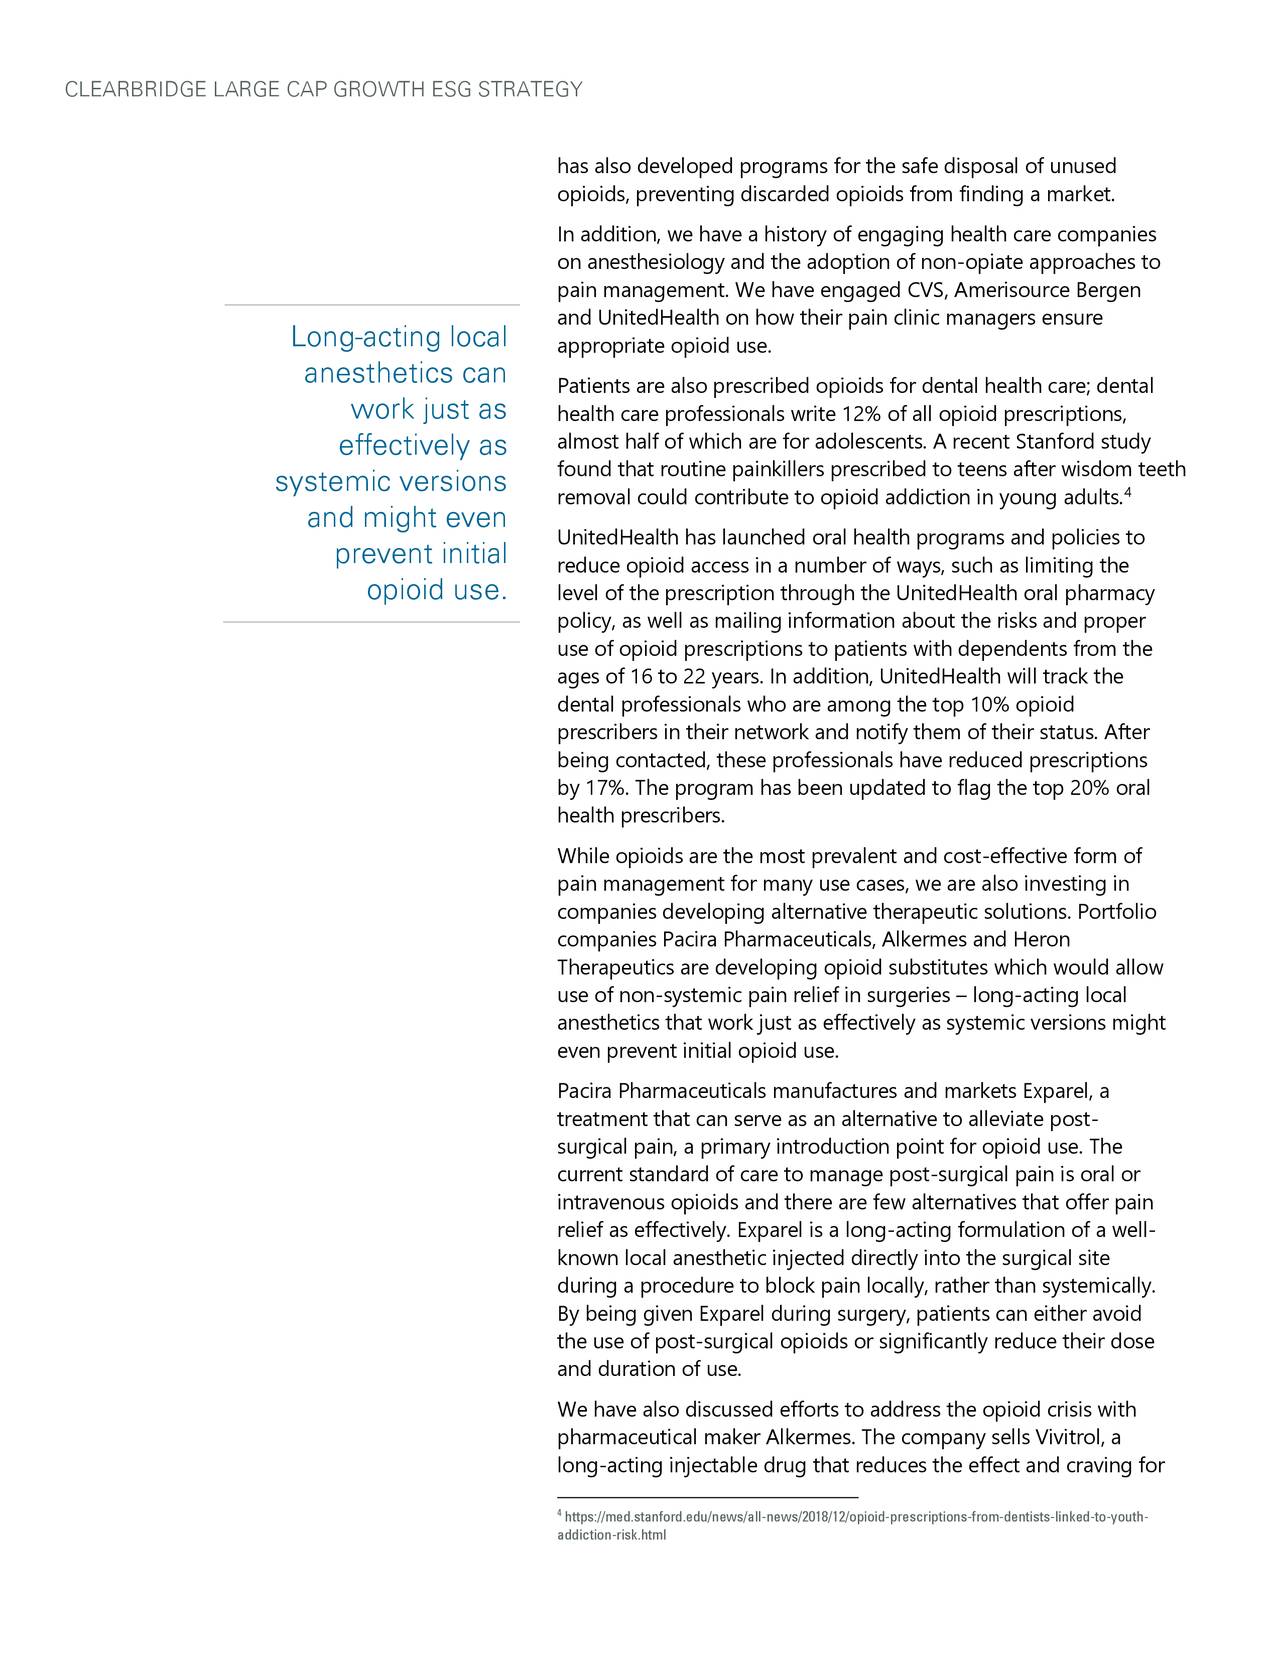 clearbridge large cap growth esg strategy portfolio manager commentary q1 2019